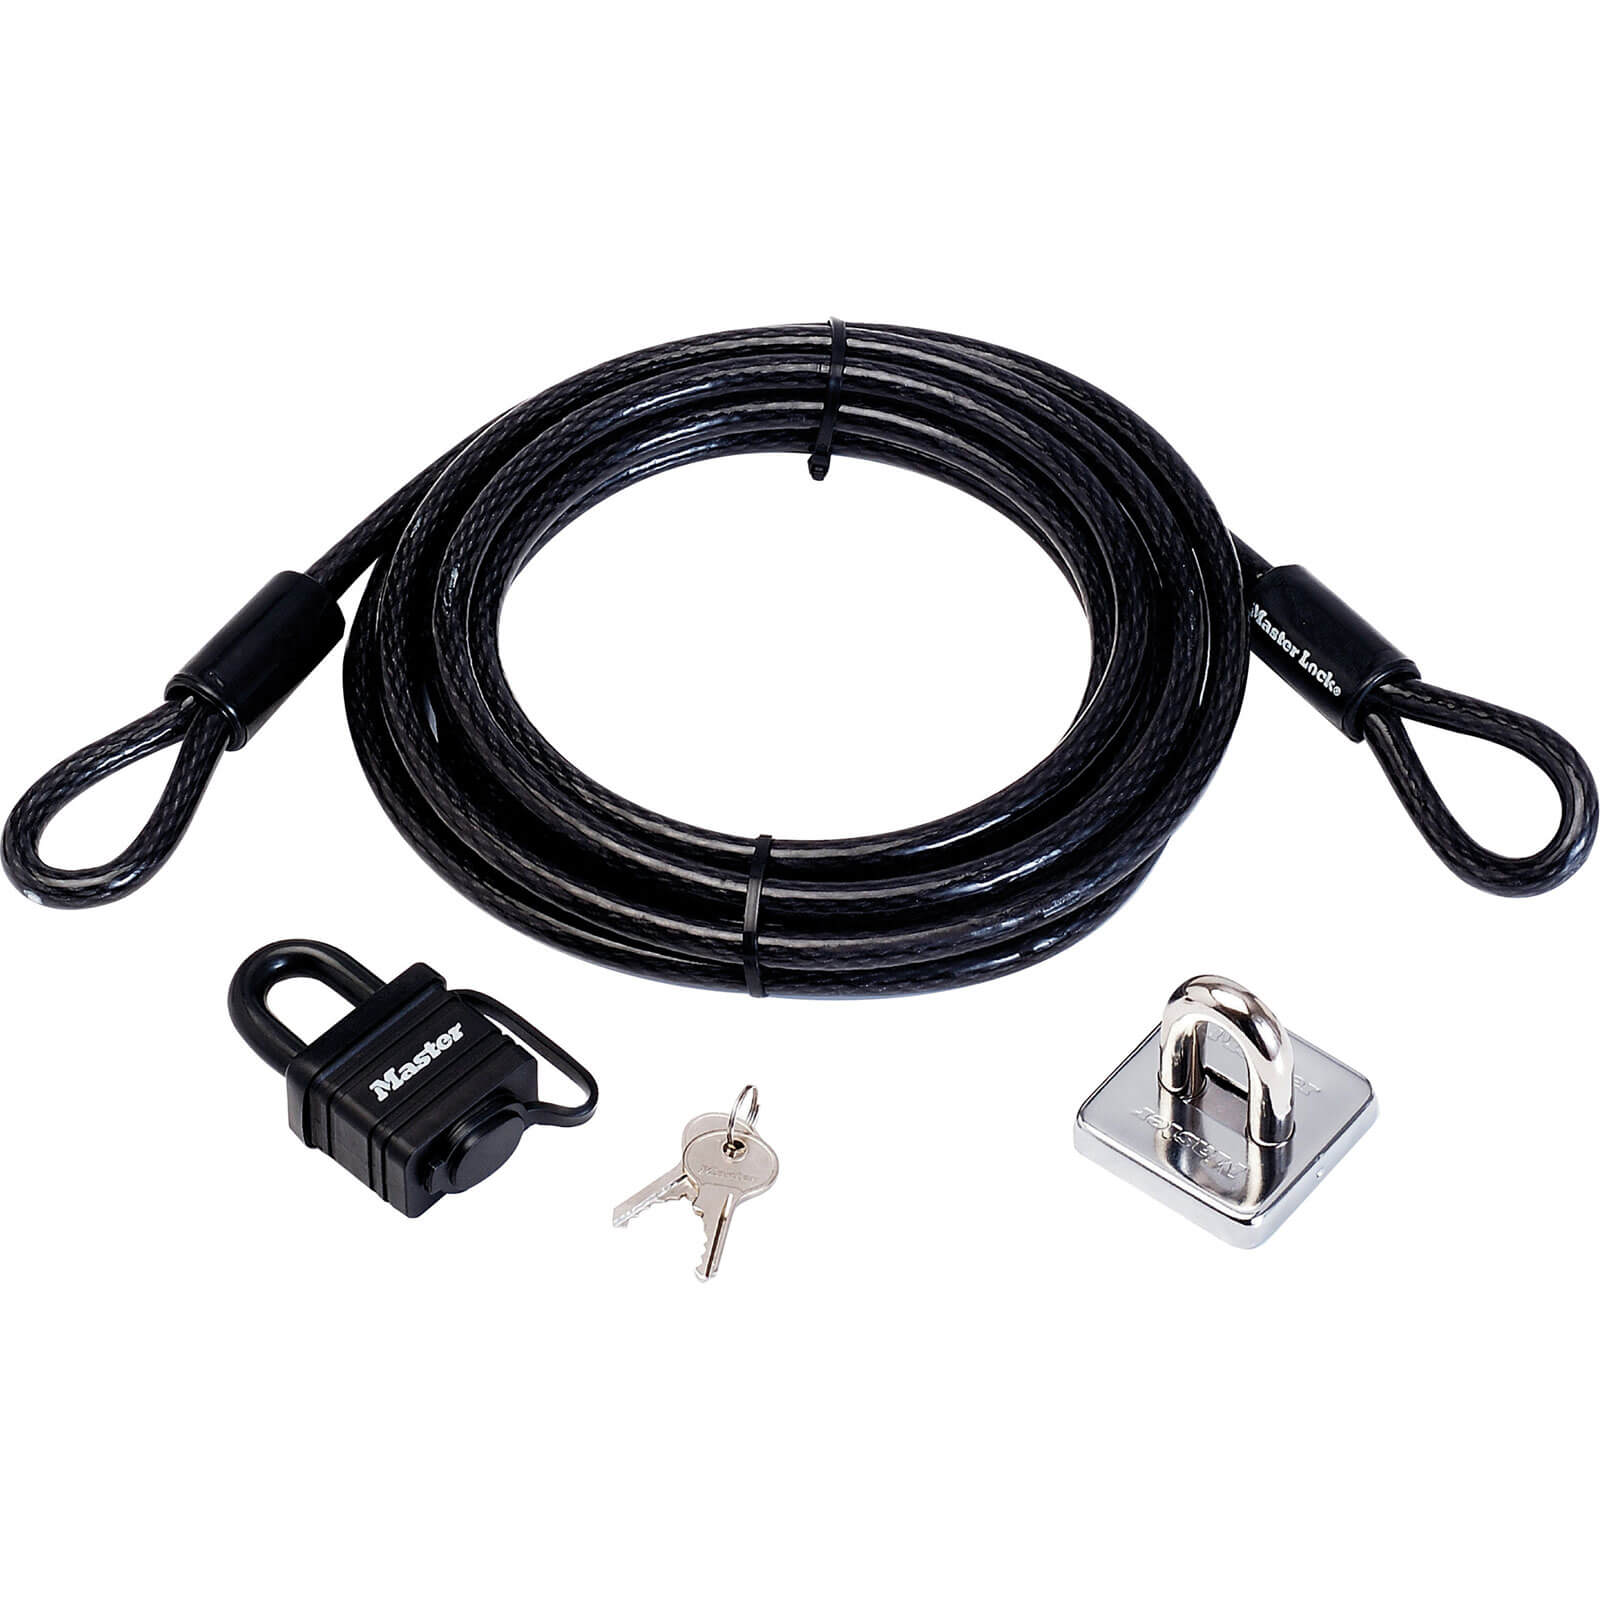 Masterlock Cable Lock And Anchor Garden Security Kit